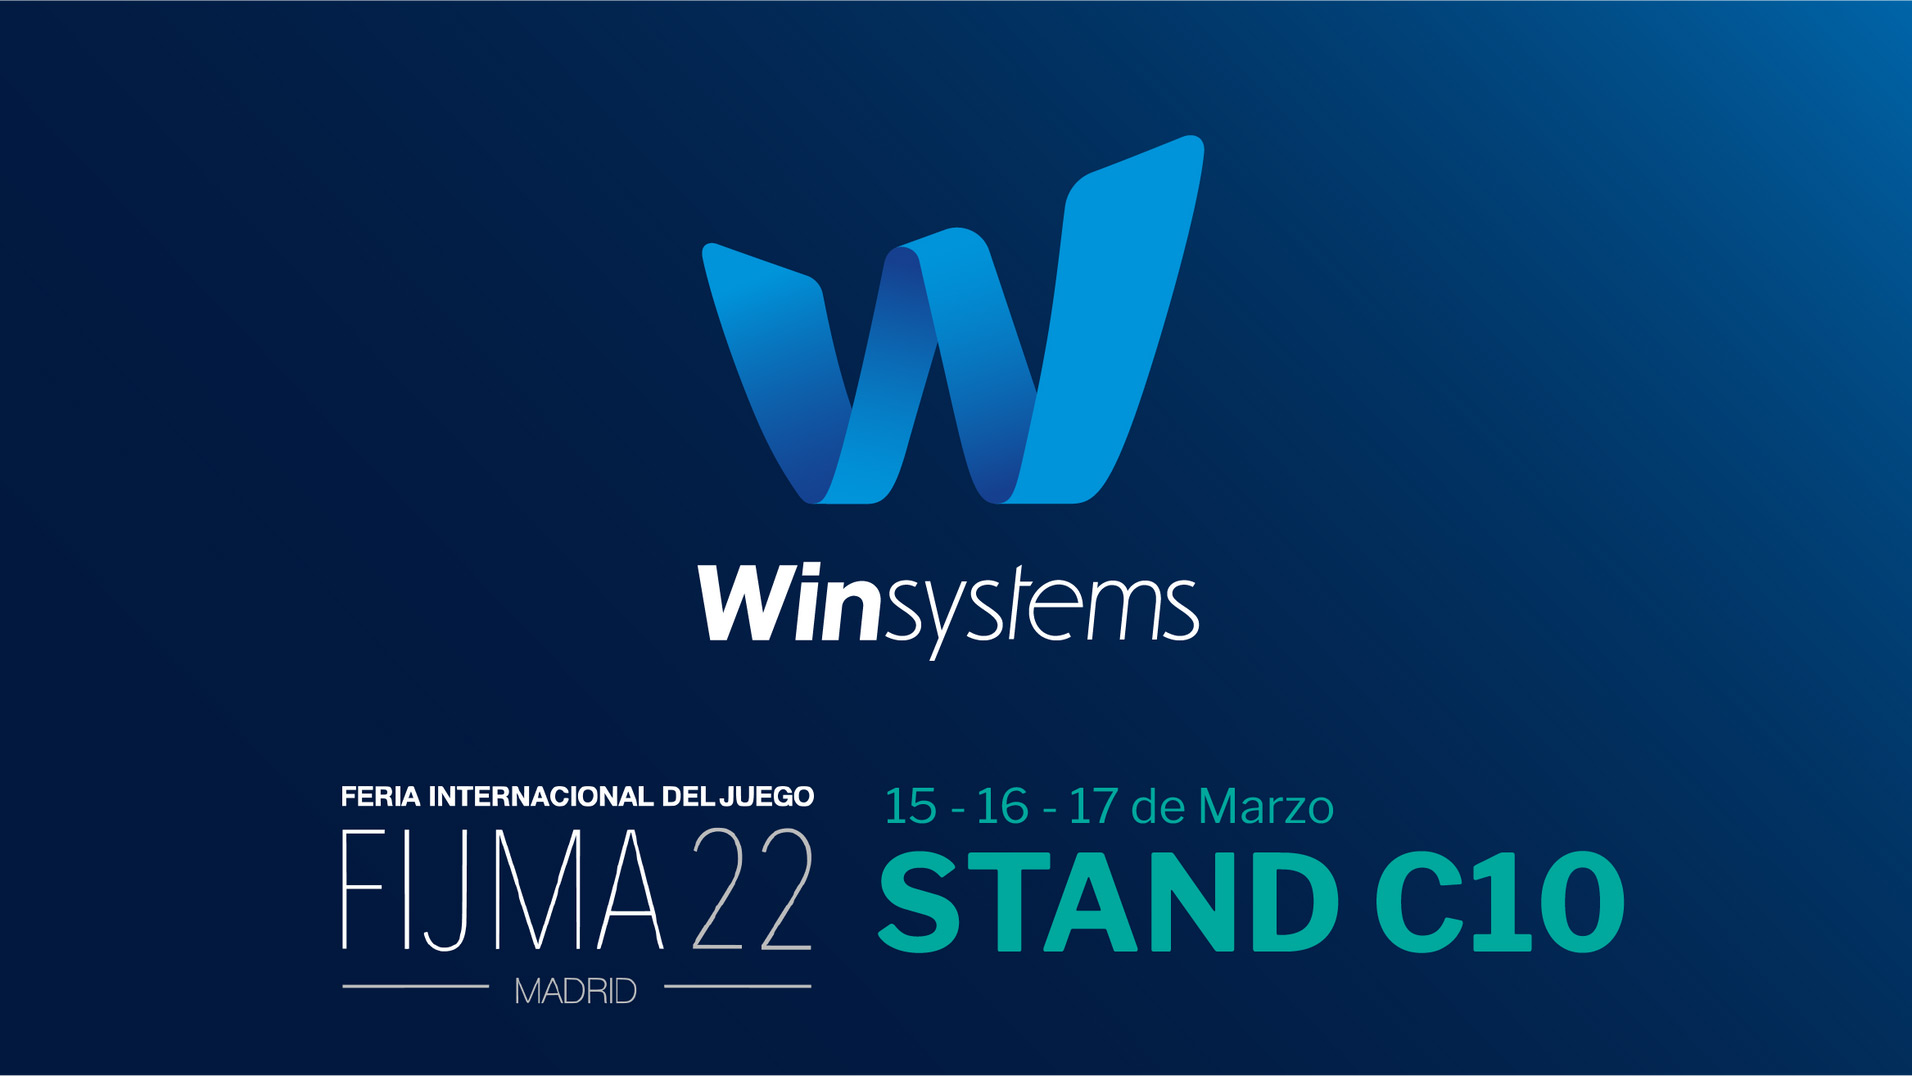 Win Systems to showcase its products at Madrid’s FIJMA 2022